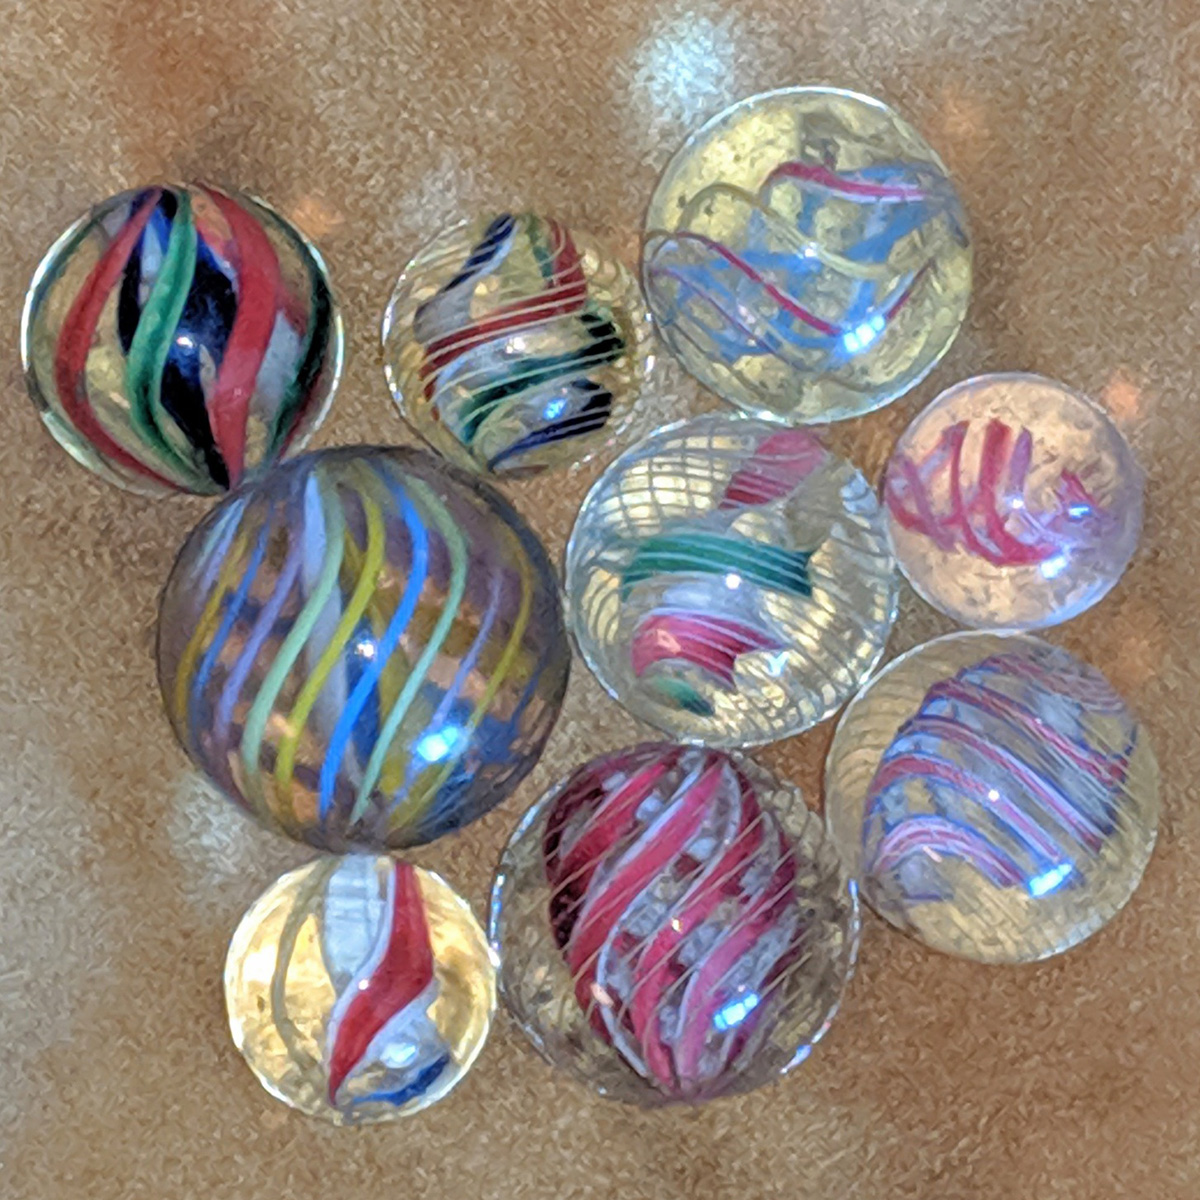 Group of Divided Core Swirl marbles